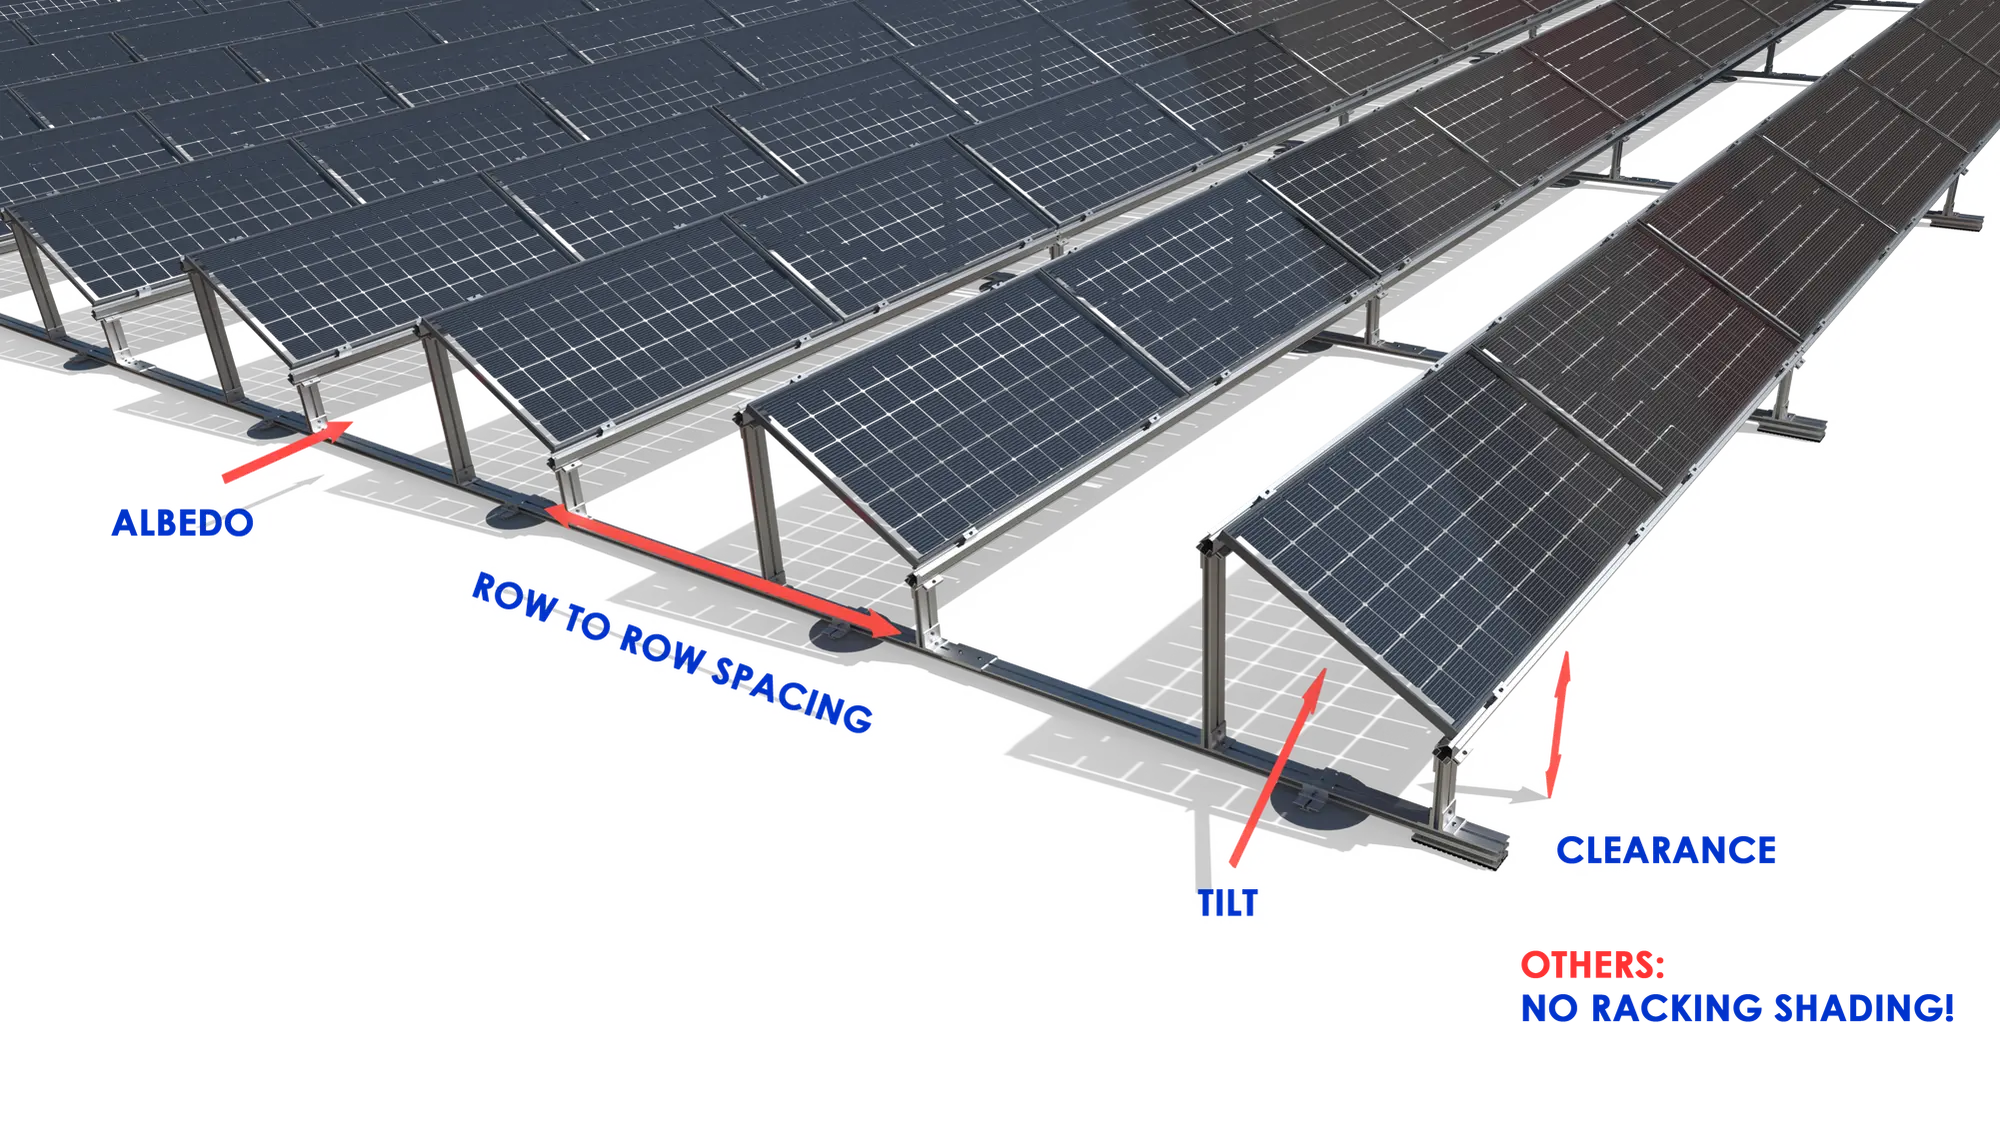 solar panel clearance - What is the area required for solar panels